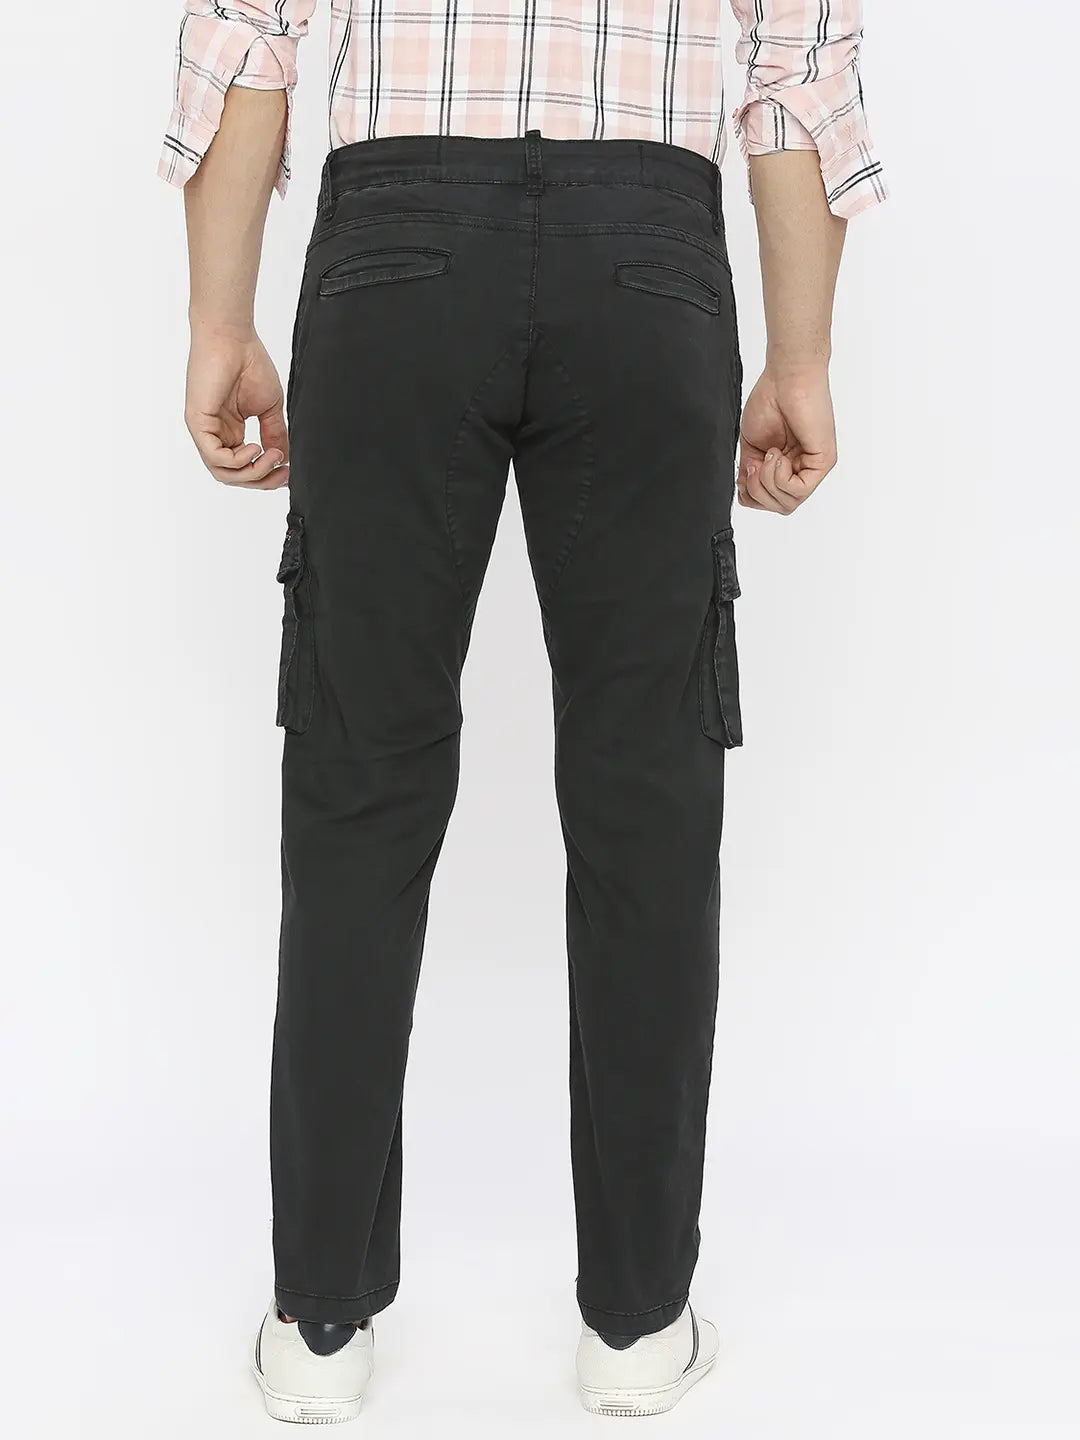 Buy Grey Trousers & Pants for Men by T-Base Online | Ajio.com